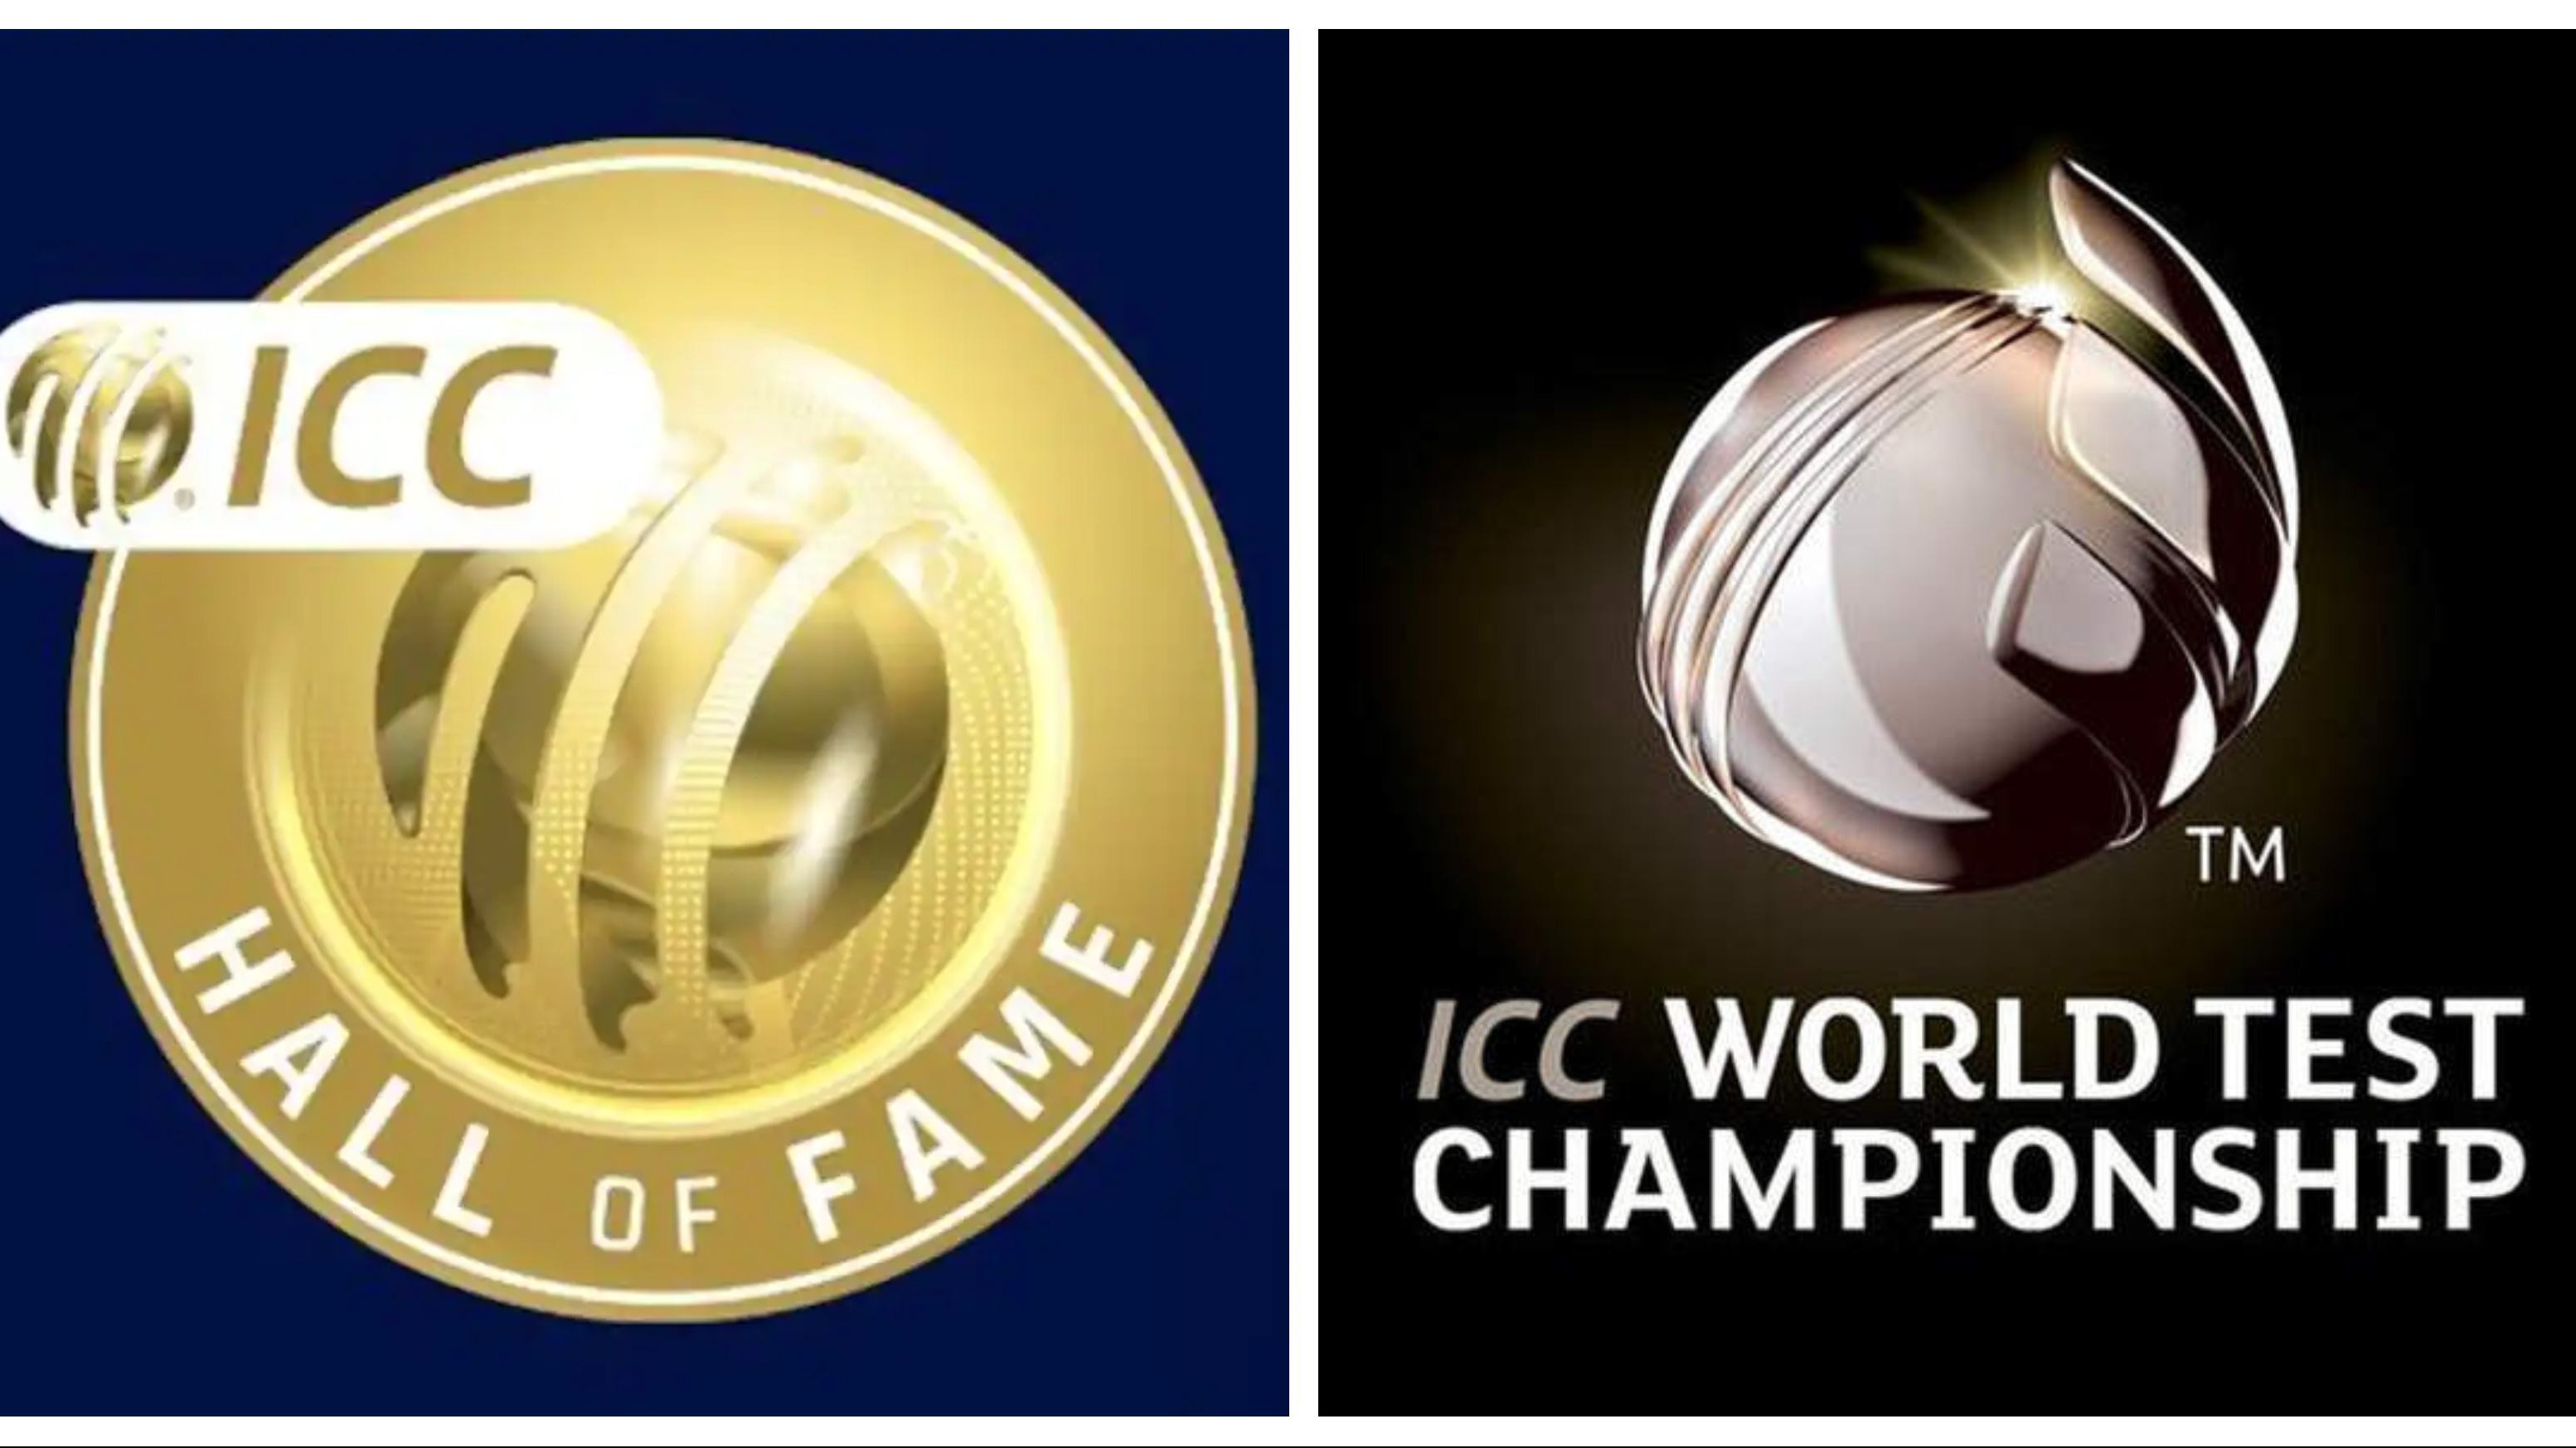 ICC to induct 10 legends from five eras into its Hall of Fame ahead of WTC final